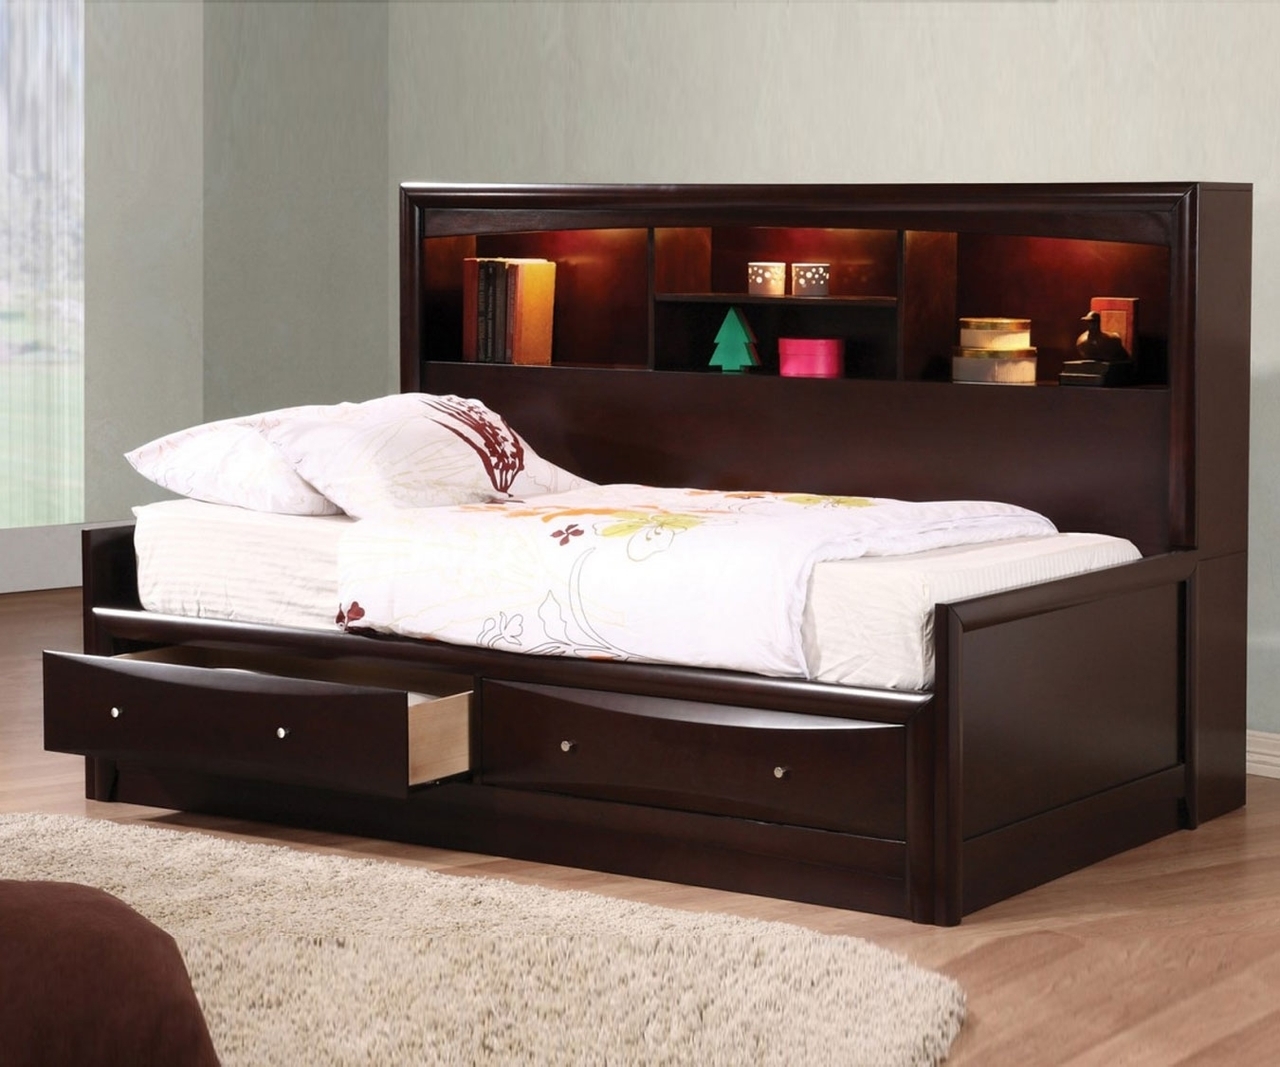 King size platform bed with storage drawers